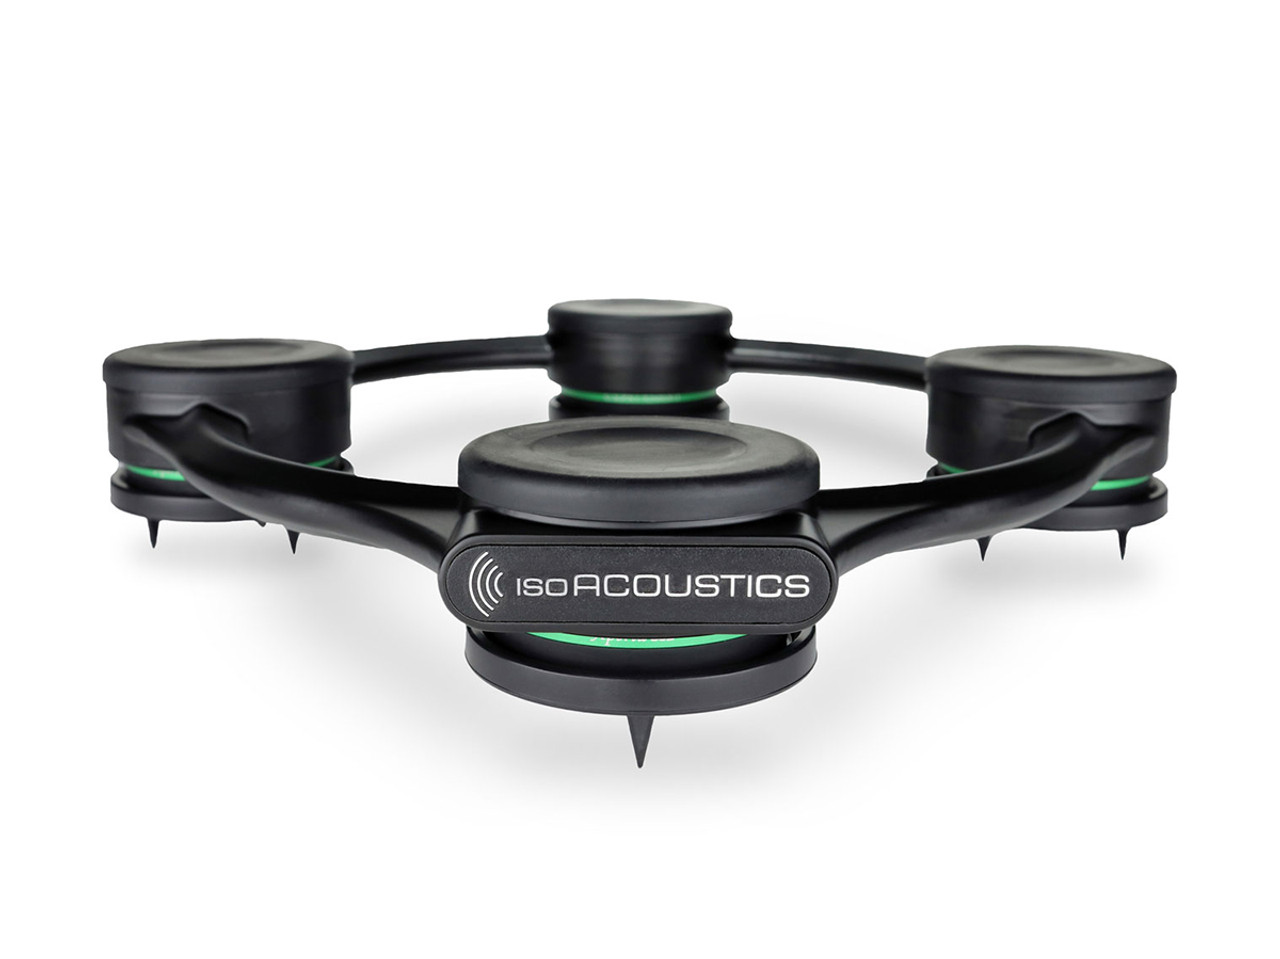 Isoacoustics Aperta Sub is a subwoofer isloation stand.